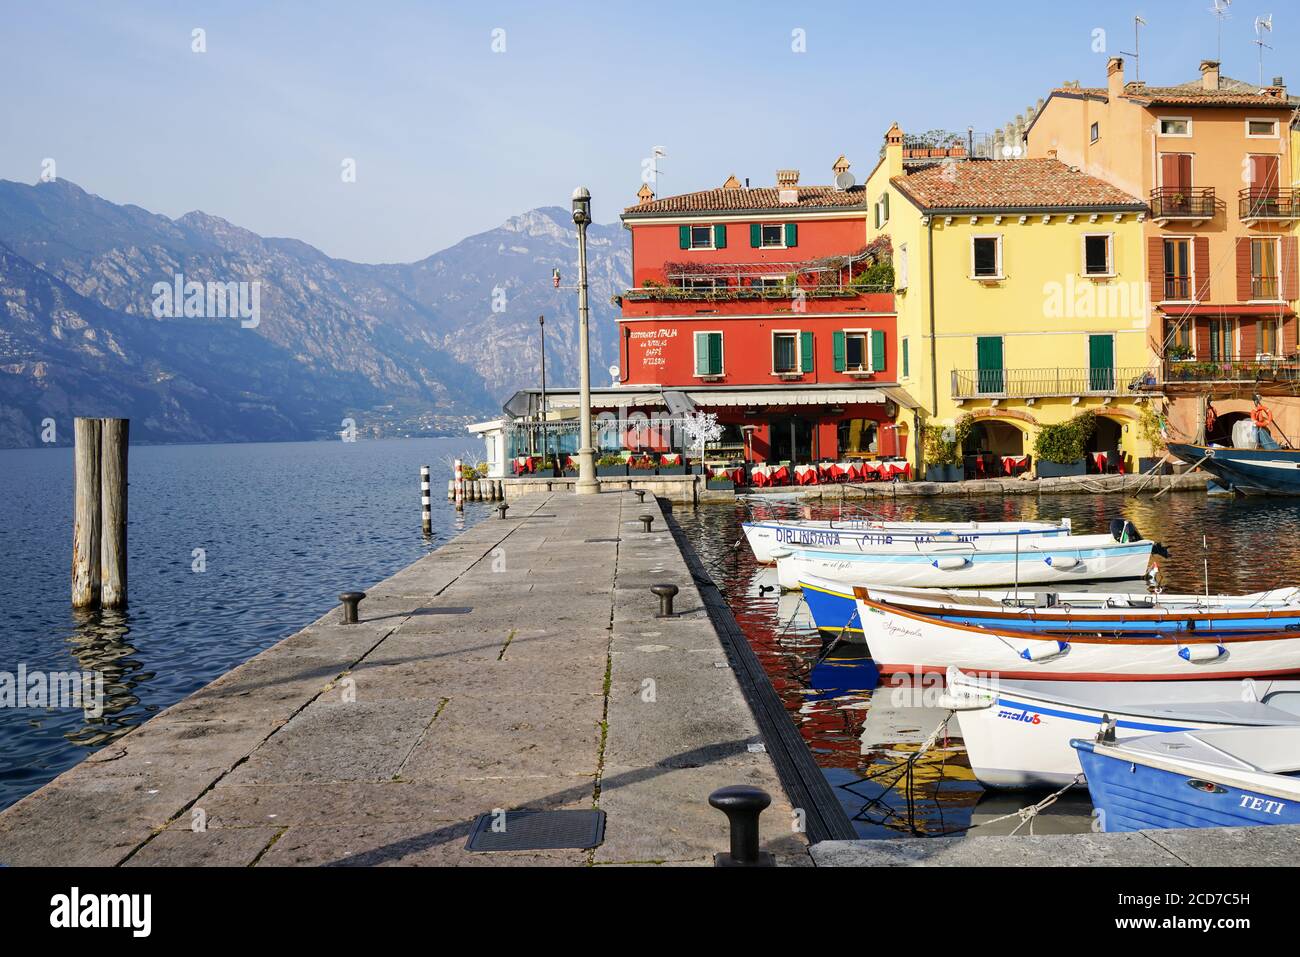 Sunny day in colorful marina of Malcesine with small boats tied up to the pier Stock Photo